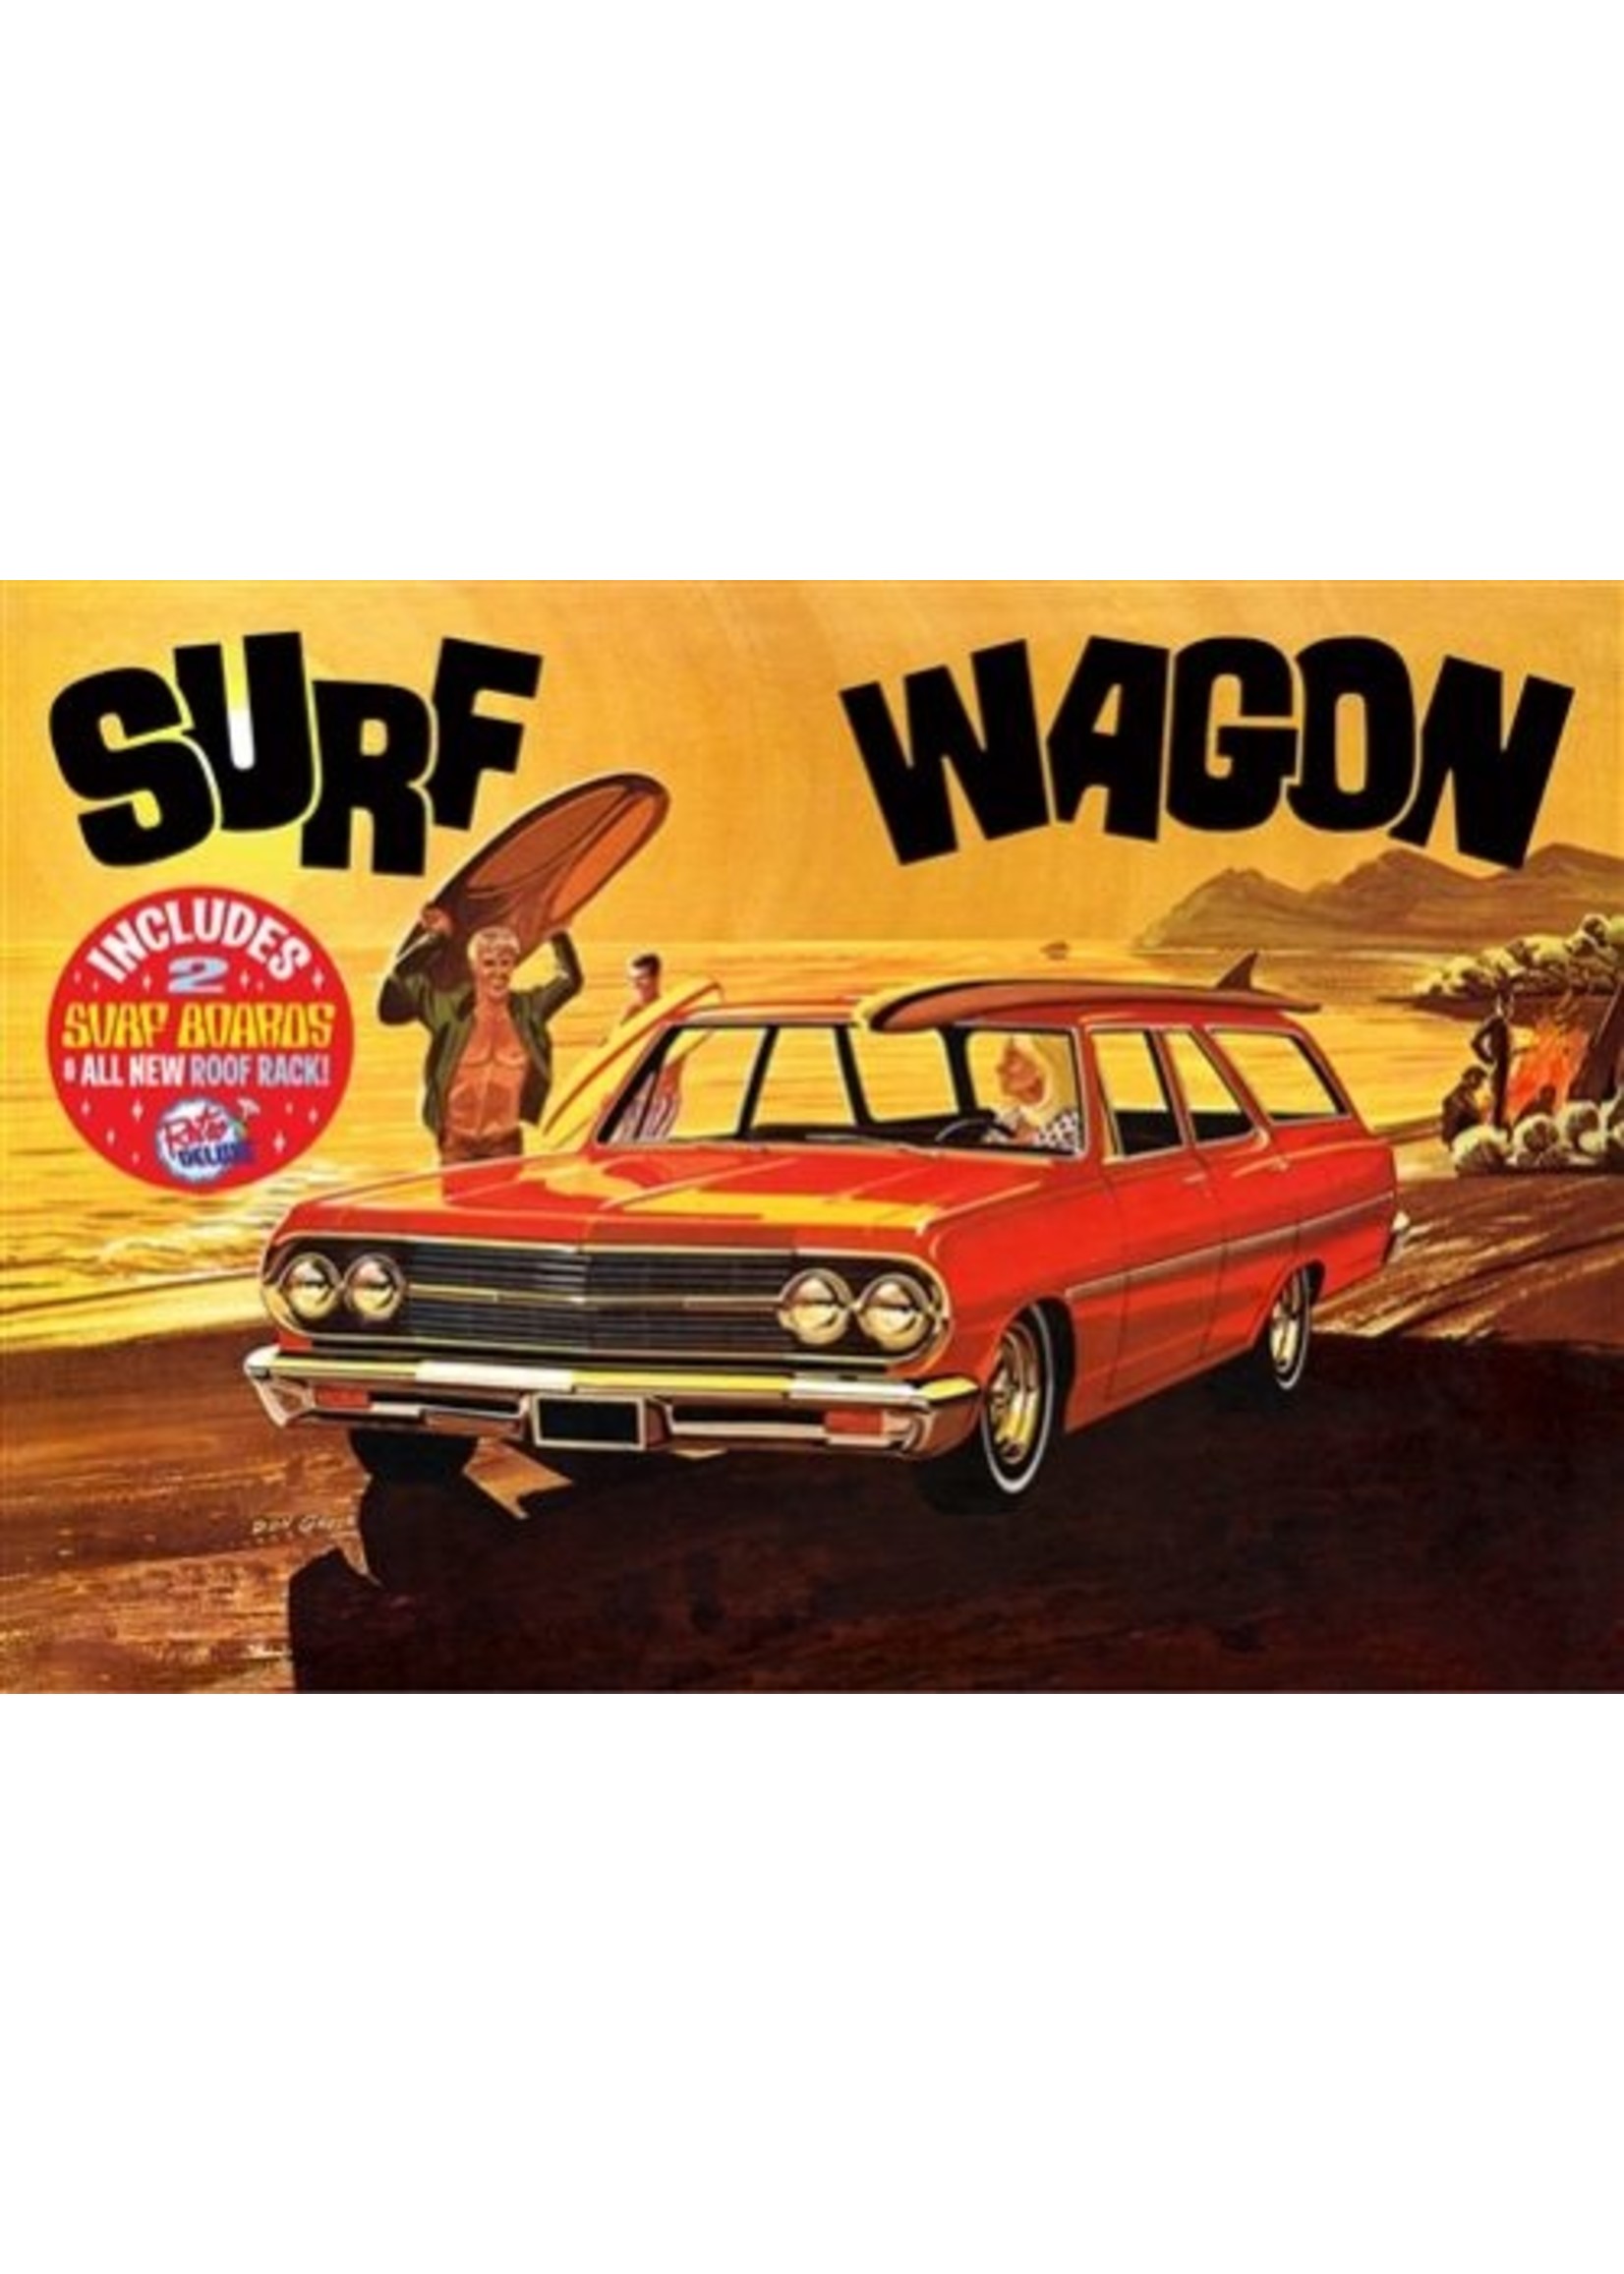 AMT 1131 - 1/25 1965 Chevy Chevelle Surf Wagon